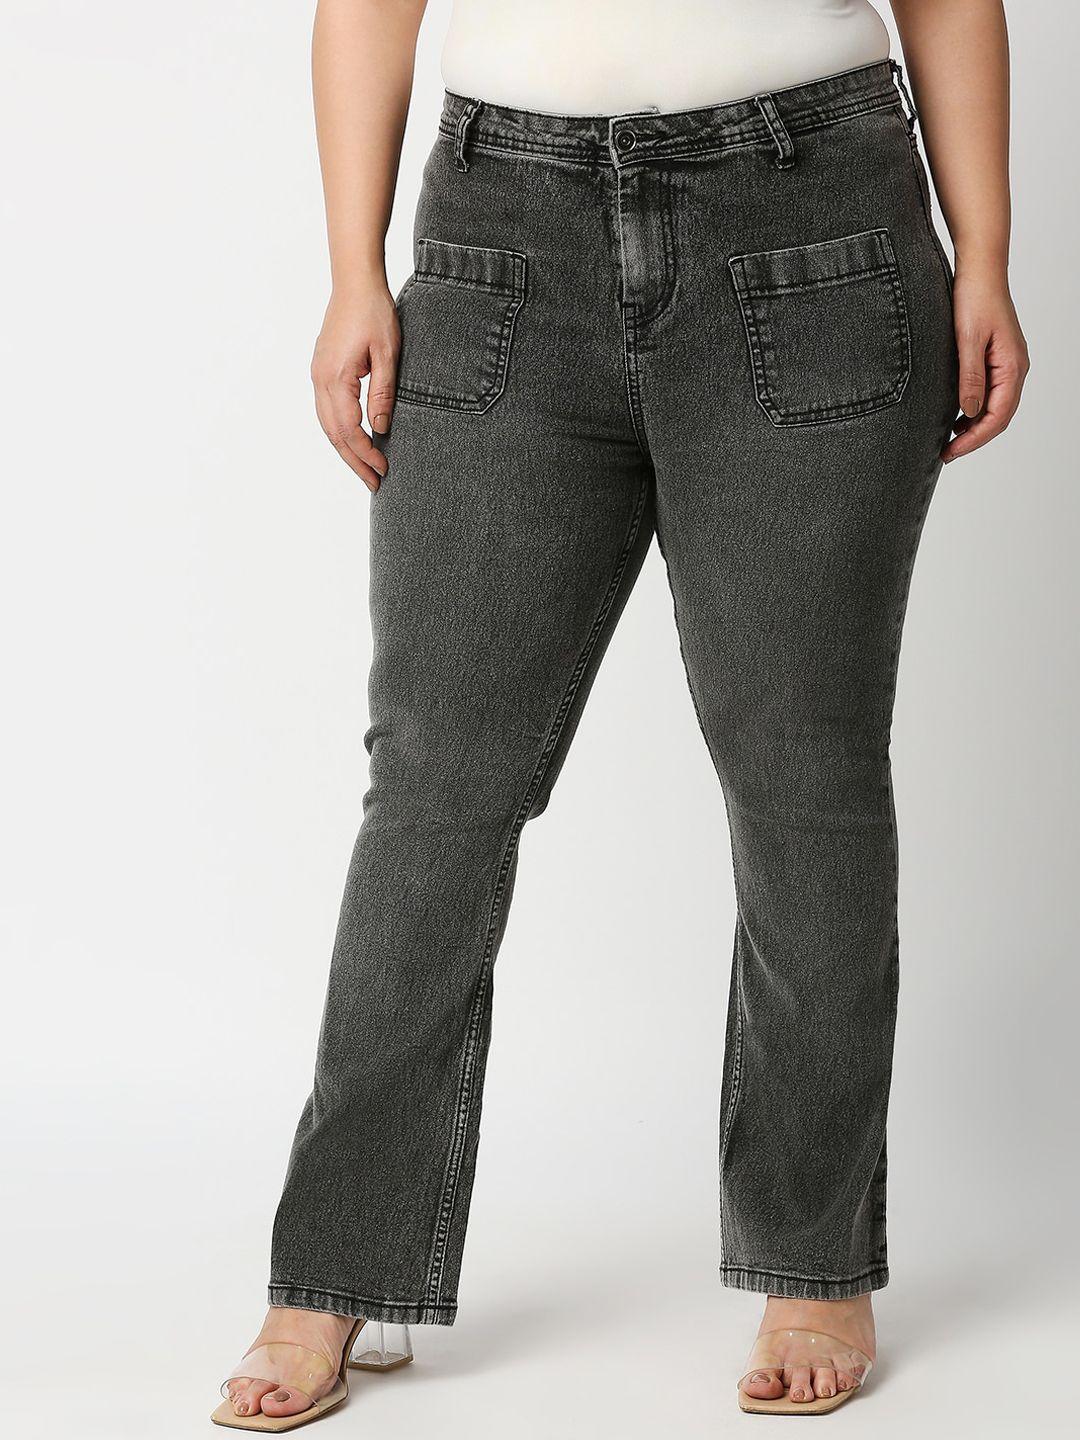 freeform-by-high-star-women-plus-size-charcoal-grey-bootcut-high-rise-low-distress-stretchable-jeans